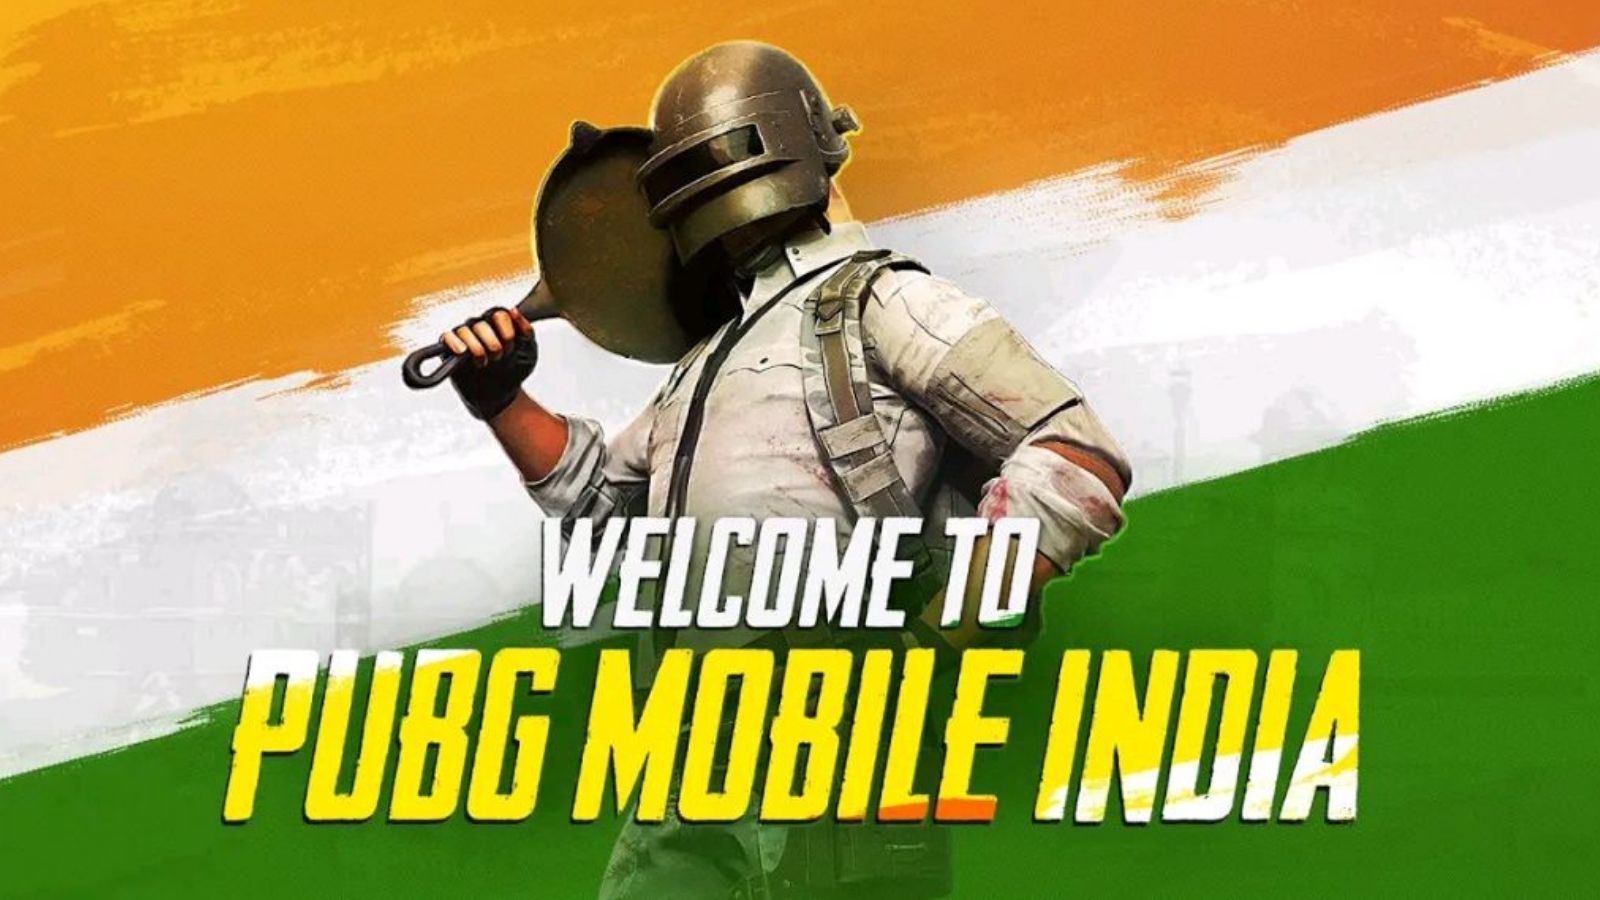 Download Battlegrounds Mobile India (BGMI) APK & OBB links Available